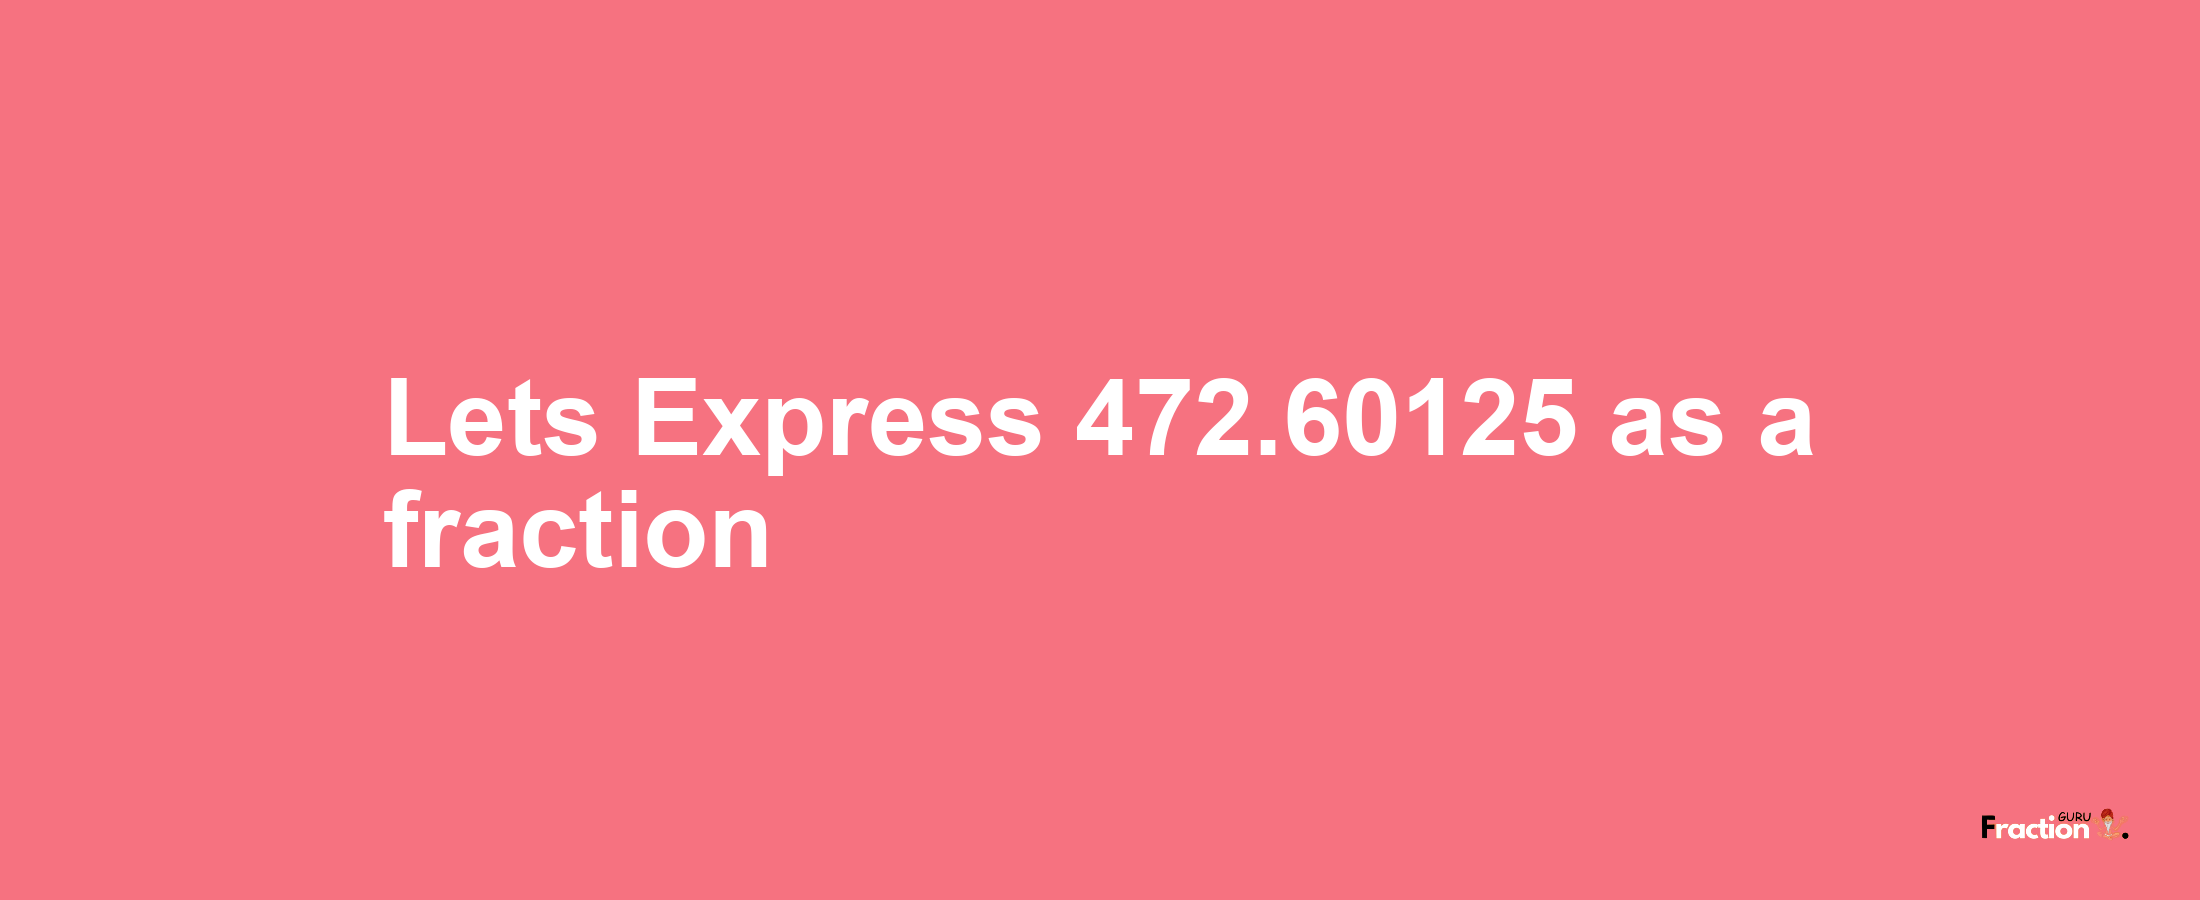 Lets Express 472.60125 as afraction